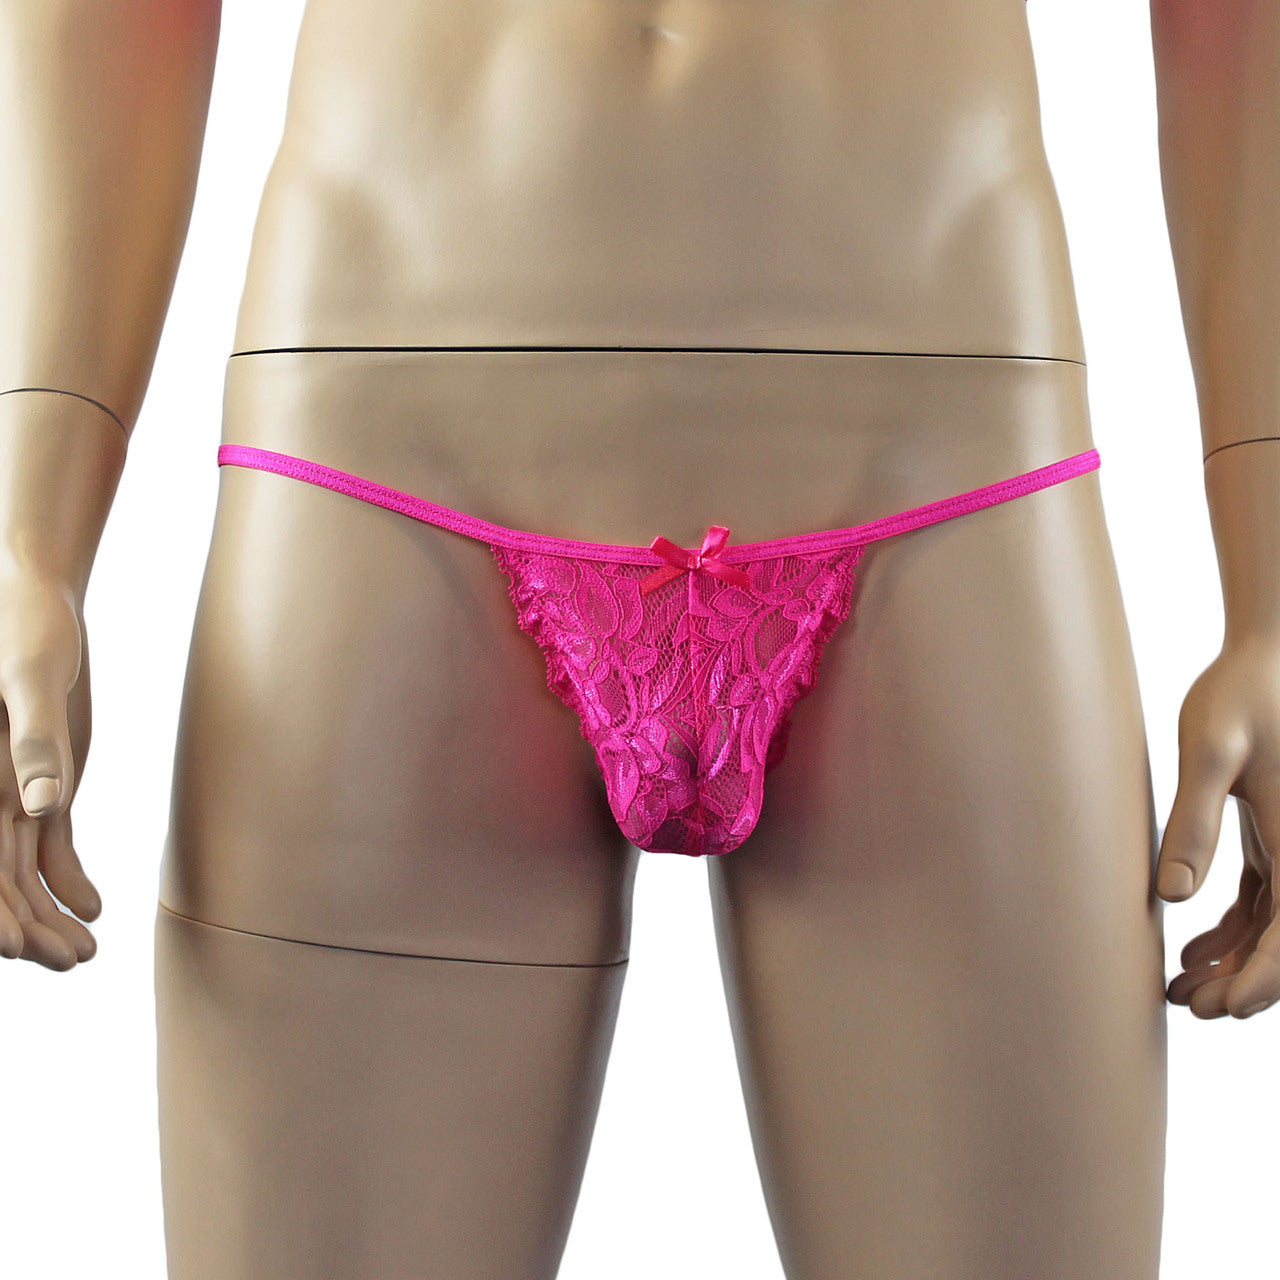 Mens Kristy Sexy Lace Pouch G string Panty Male Lingerie Hot Pink